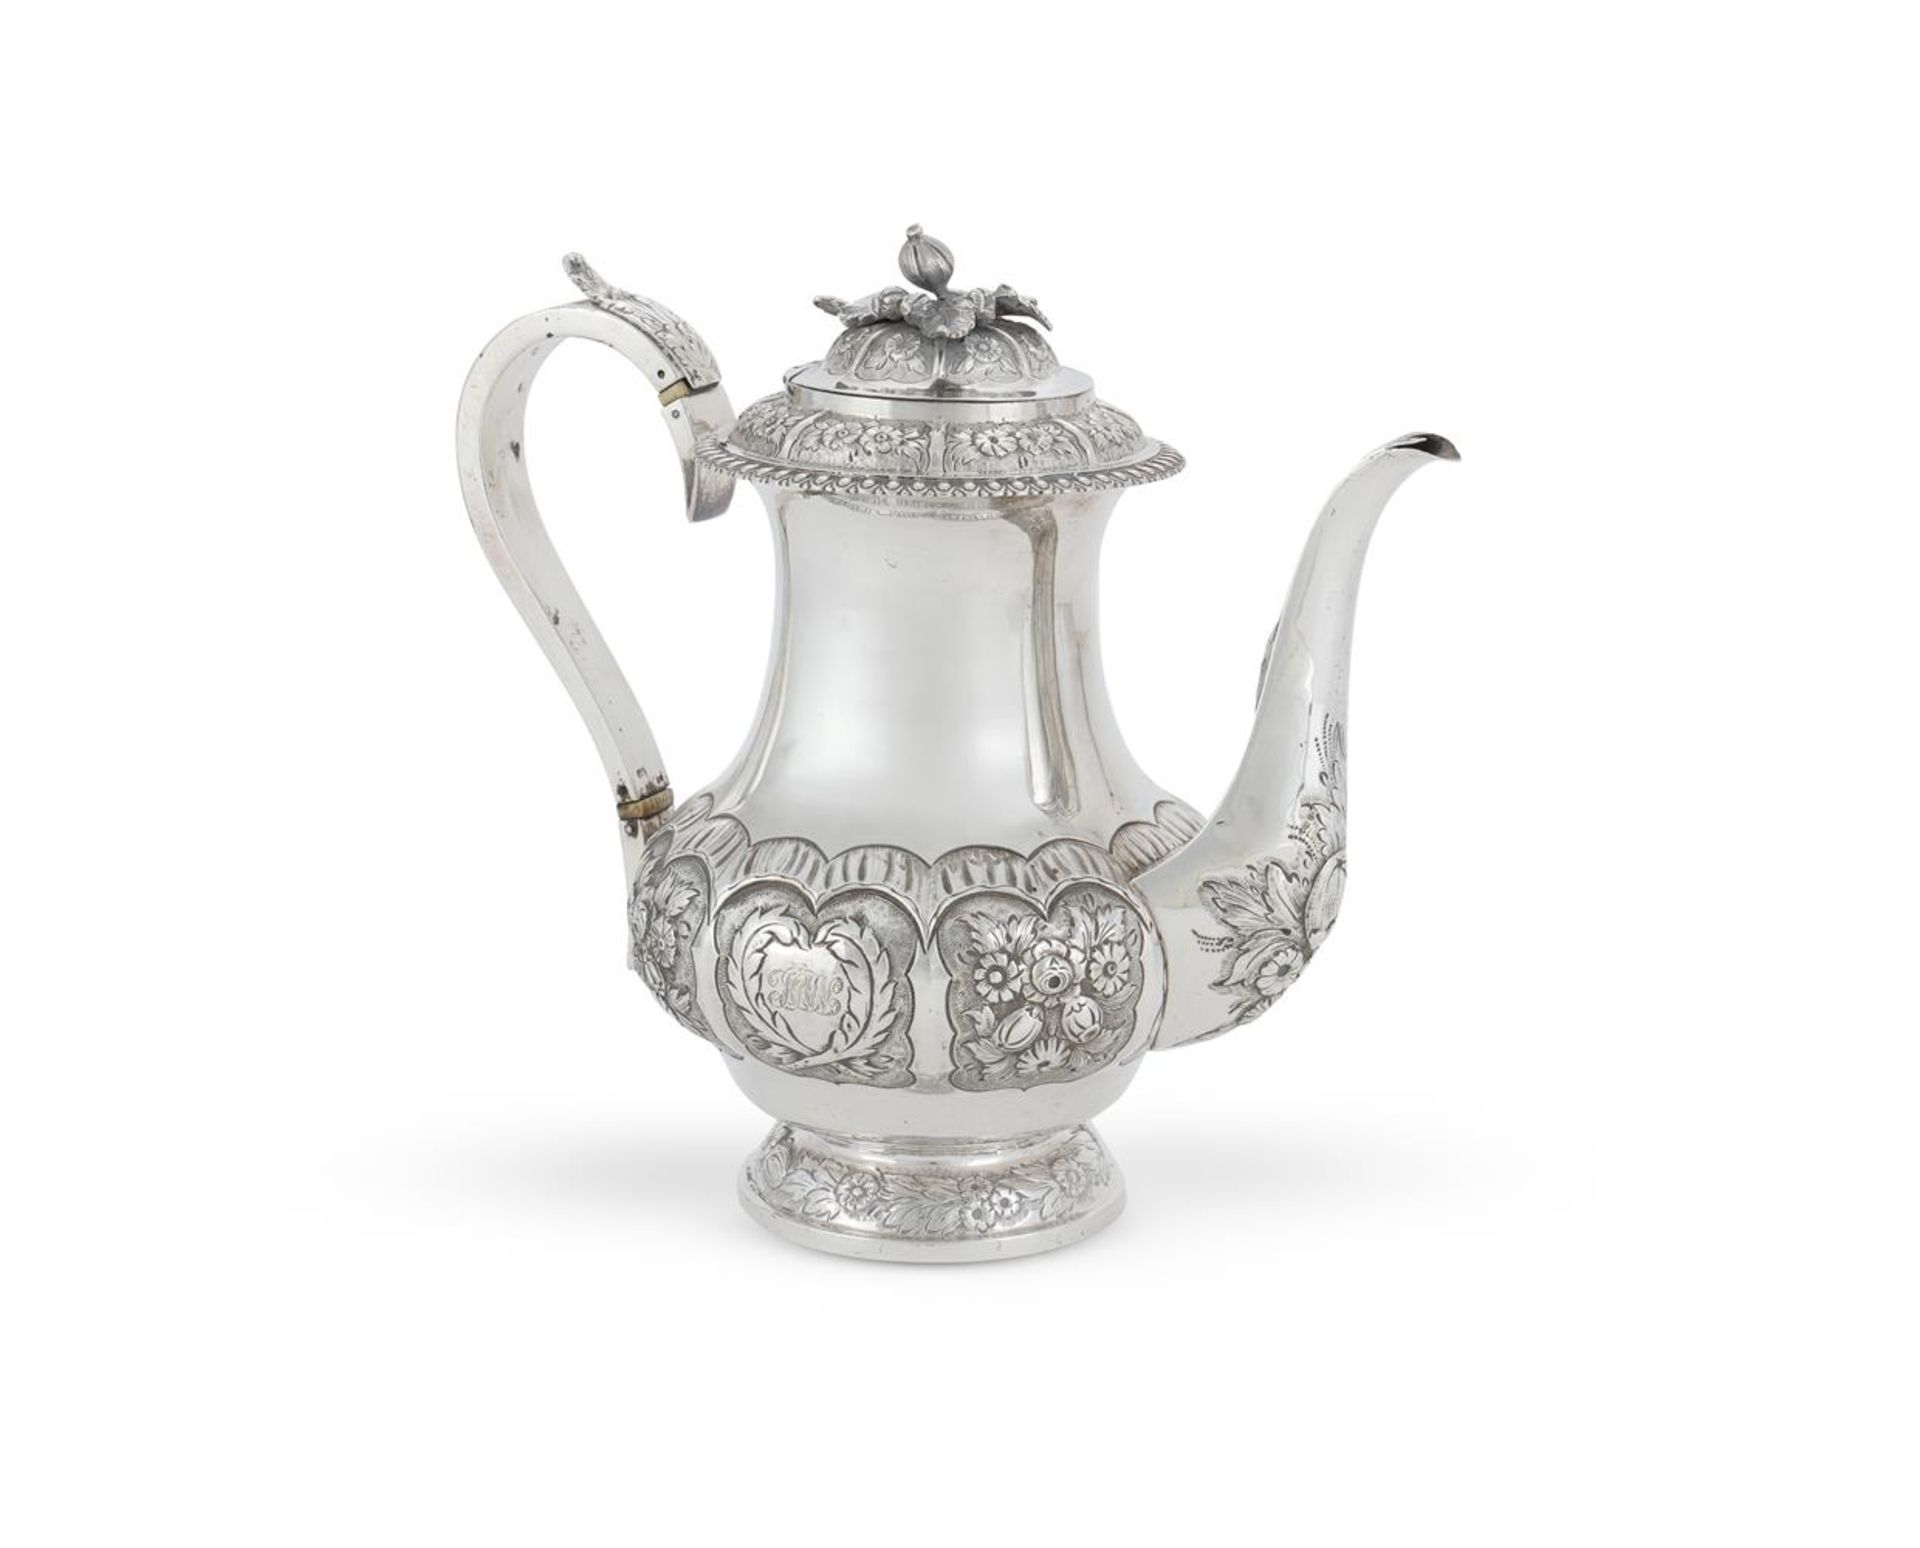 Y A SILVER MATCHED FOUR PIECE BALUSTER TEA AND COFFEE SET - Image 3 of 6